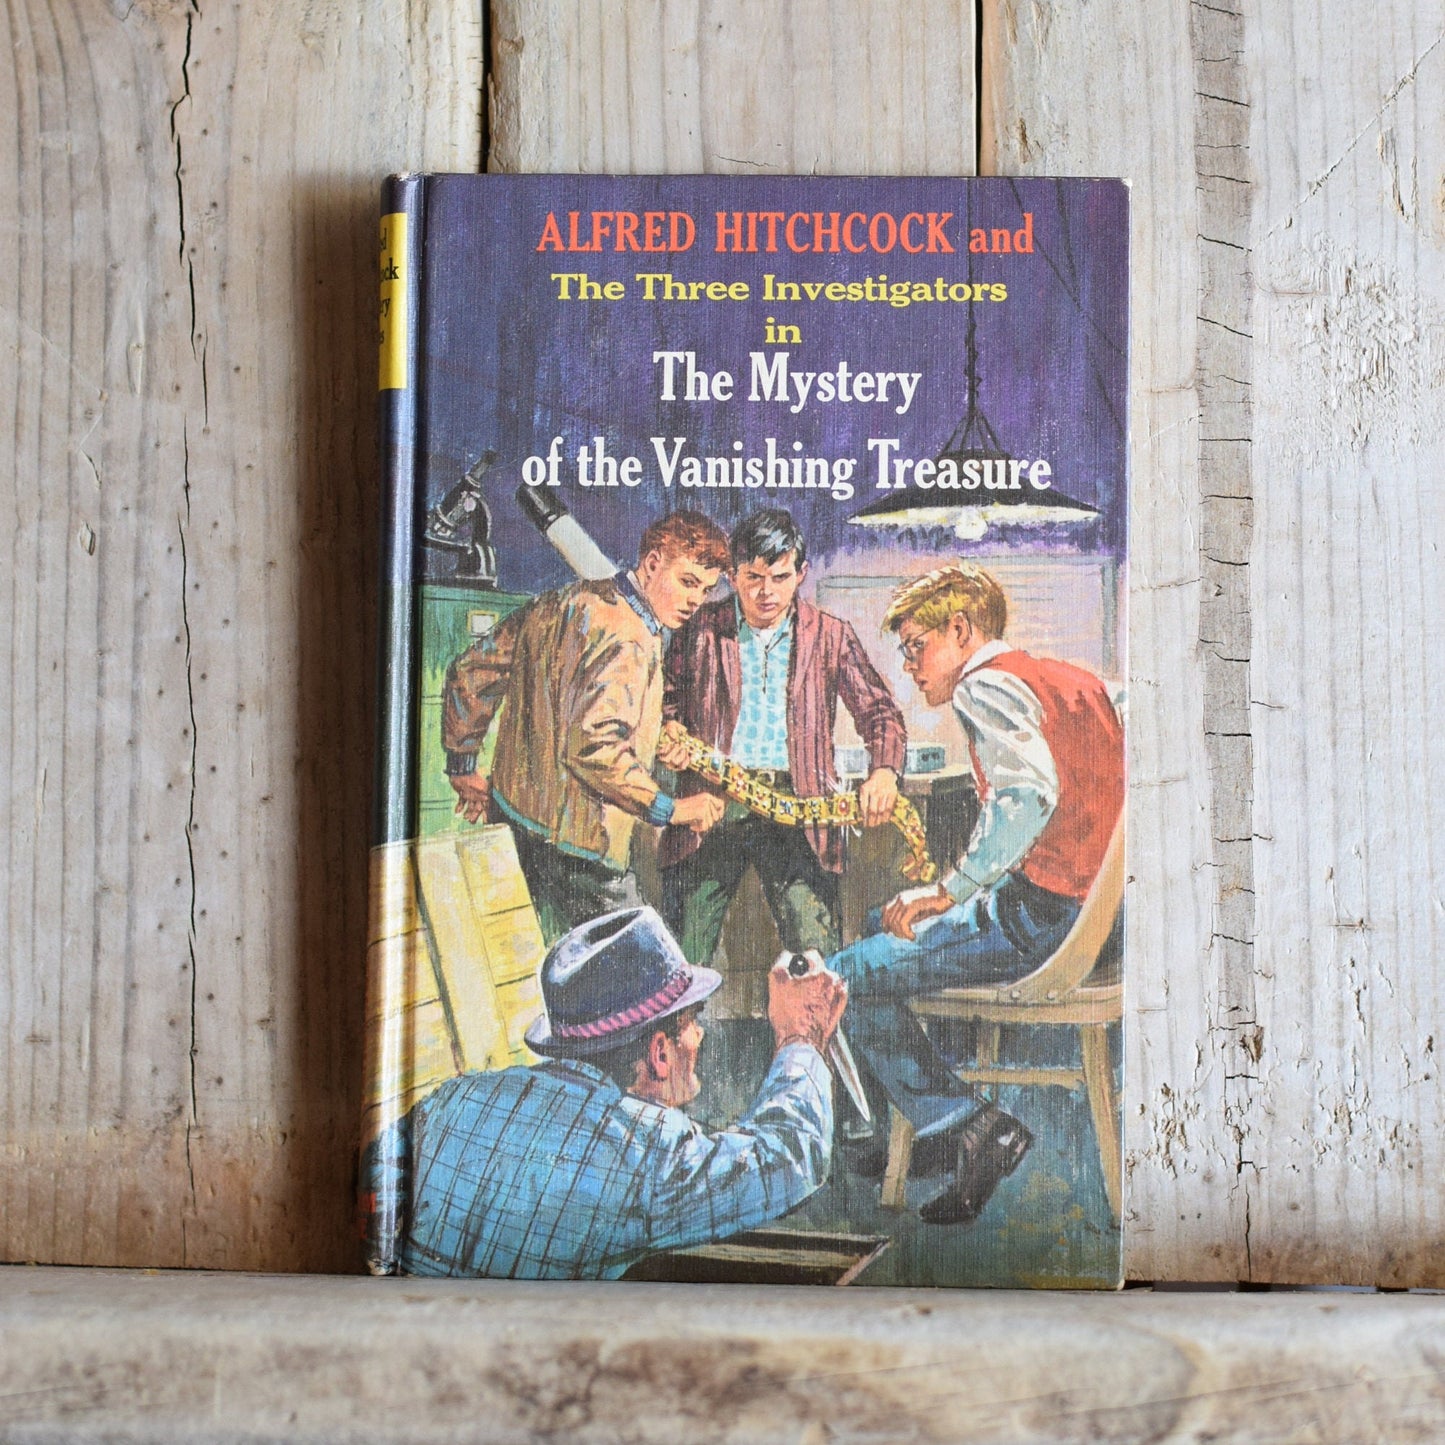 Vintage Fiction Hardback Novel: Alfred Hitchcock and The Three Investigators in The Mystery of the Vanishing Treasure 1966